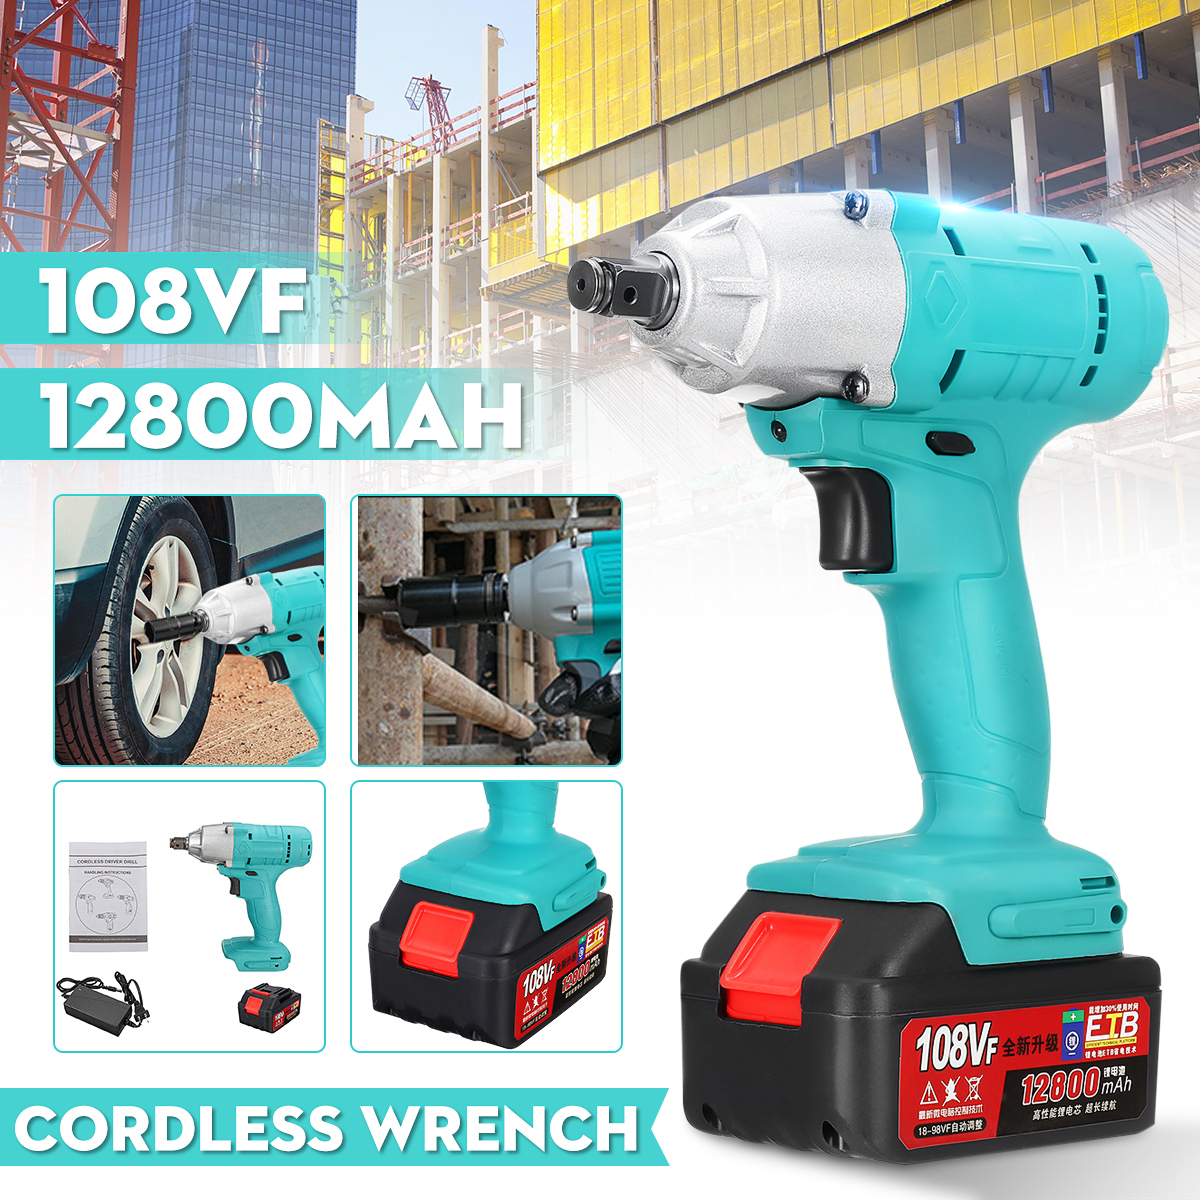 108VF-12800mAh-Lithium-Ion-Battery-Electric-Cordless-Impact-Wrench-Drill-Driver-Kit-1466581-2